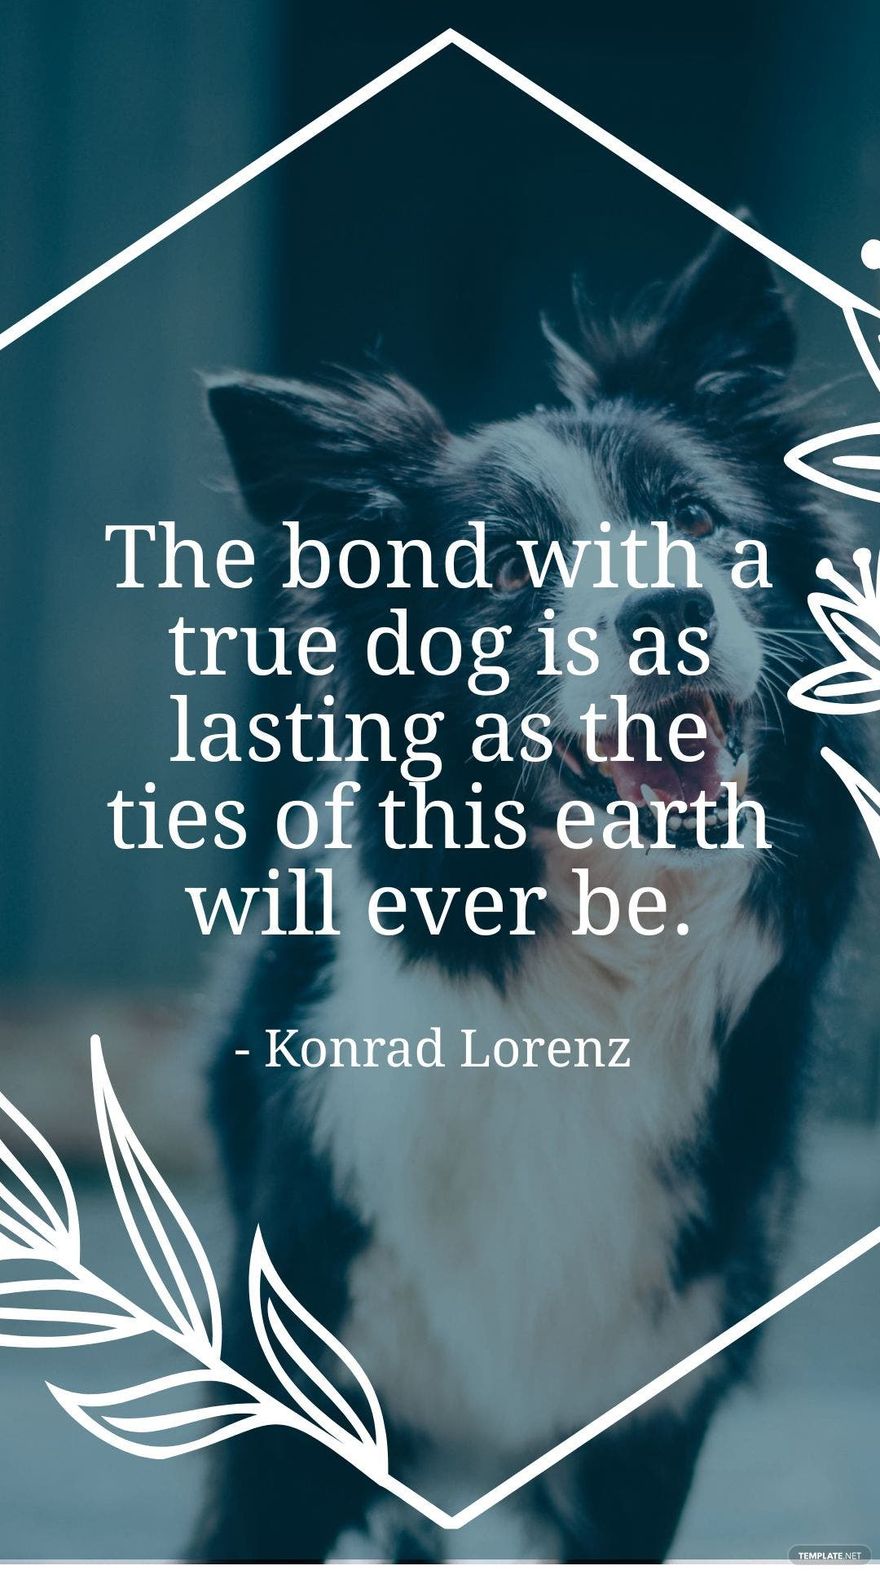 Konrad Lorenz - The bond with a true dog is as lasting as the ties of this earth will ever be.